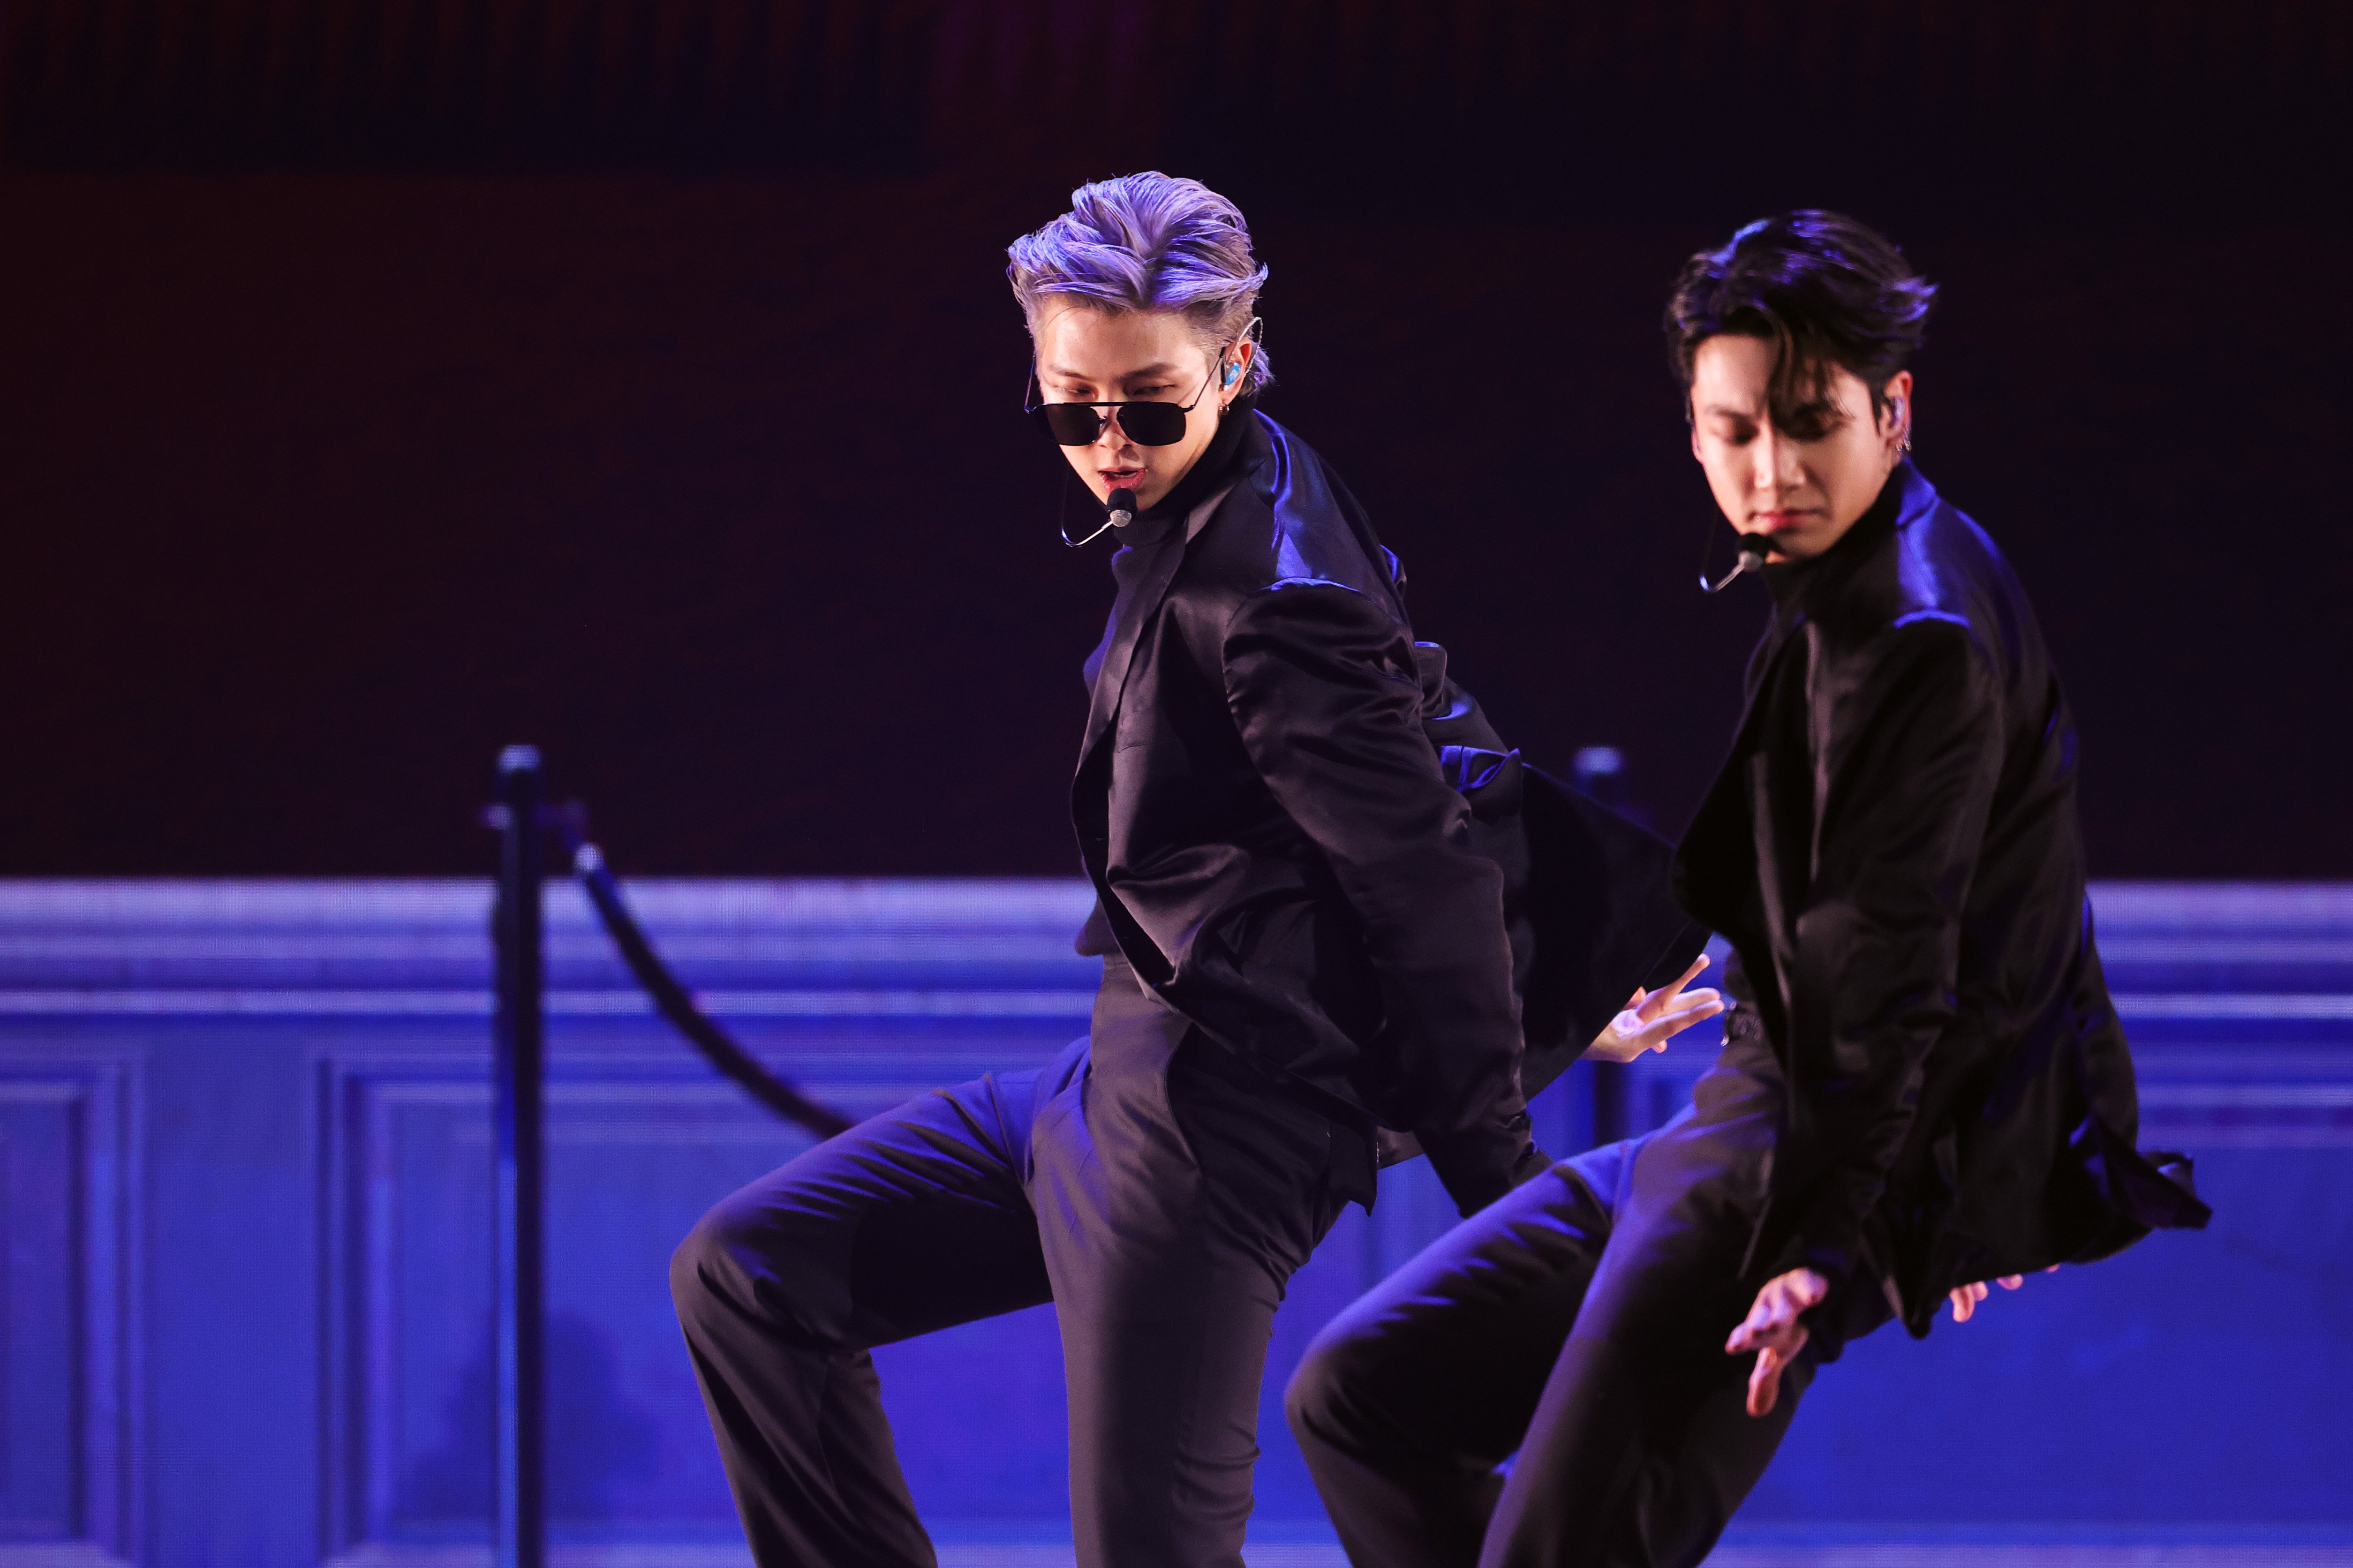 RM and Jungkook of BTS perform during the 64th Annual GRAMMY Awards at MGM Grand Garden Arena